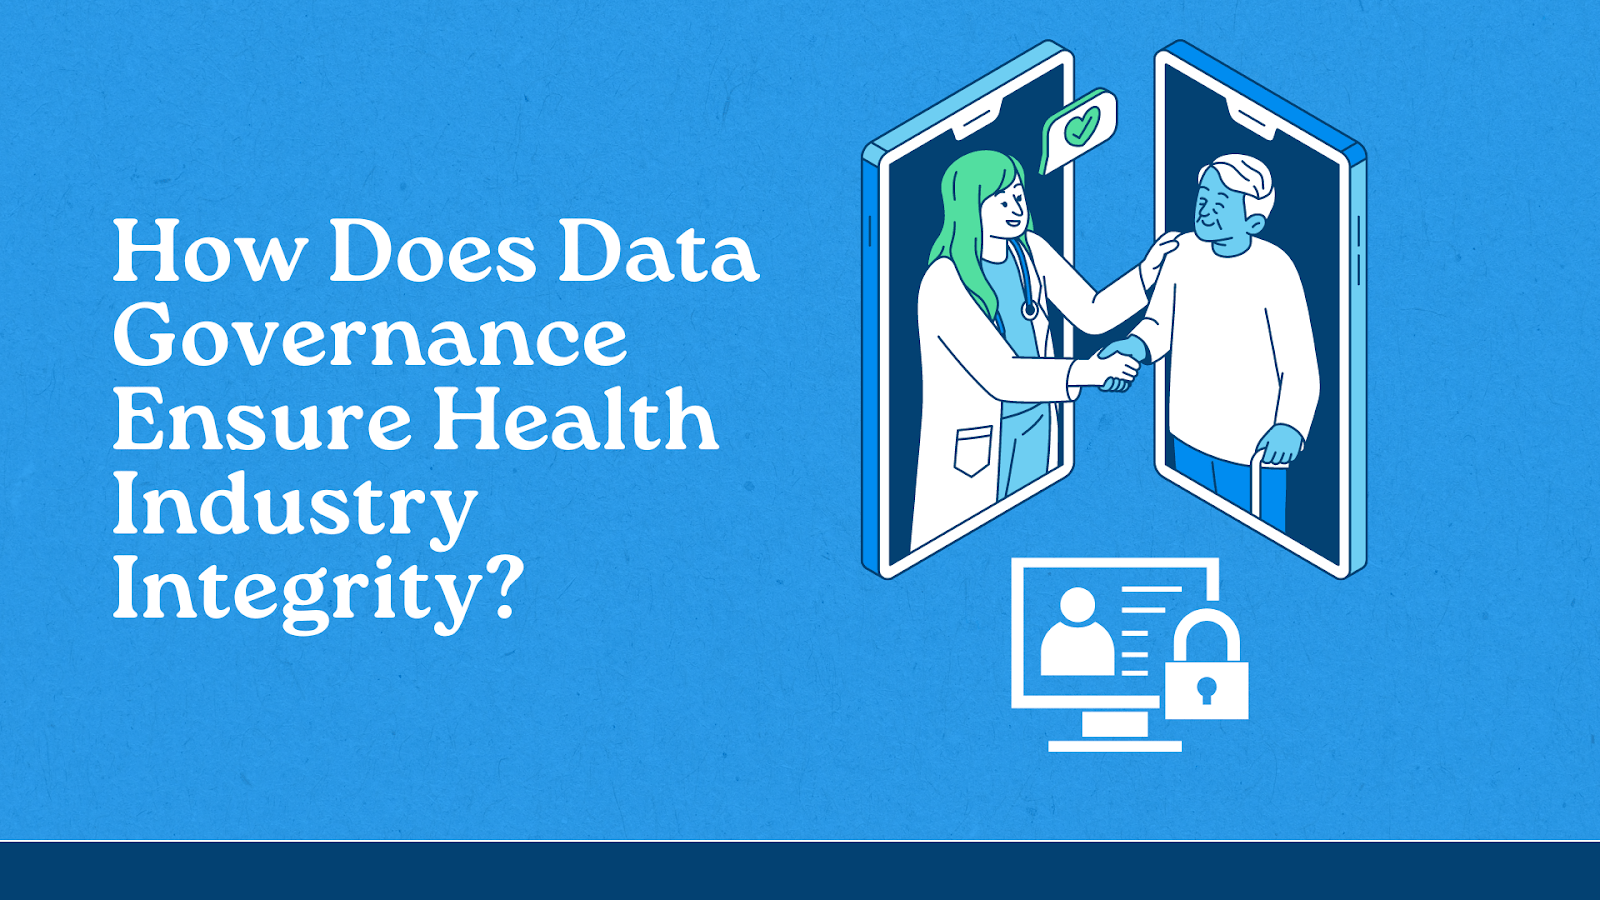 How Does Data Governance Ensure Health Industry Integrity?